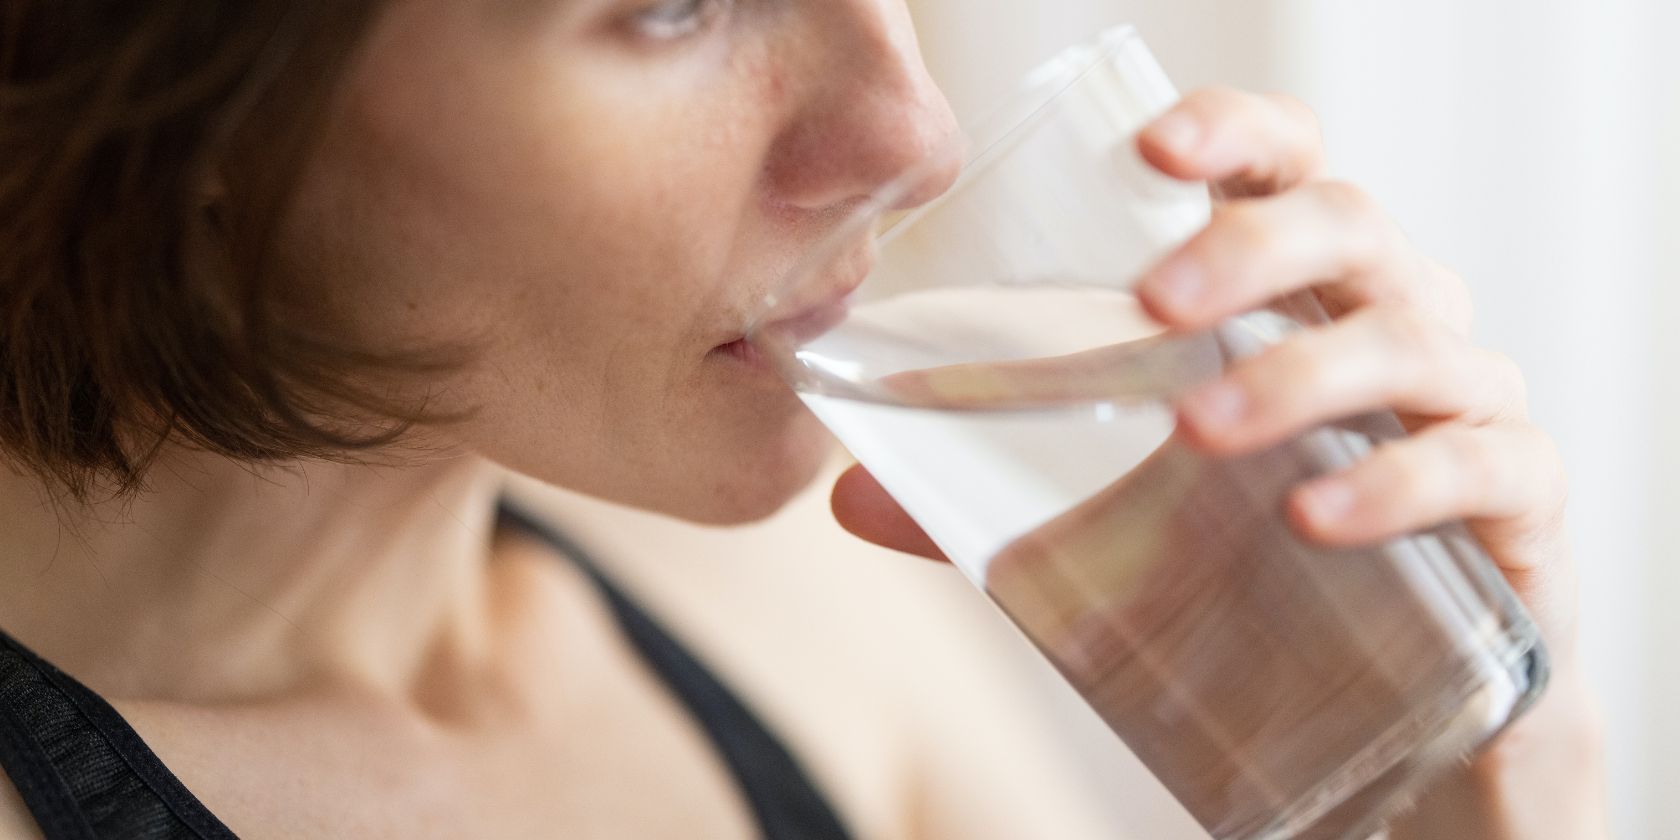 person drinking a glass of water